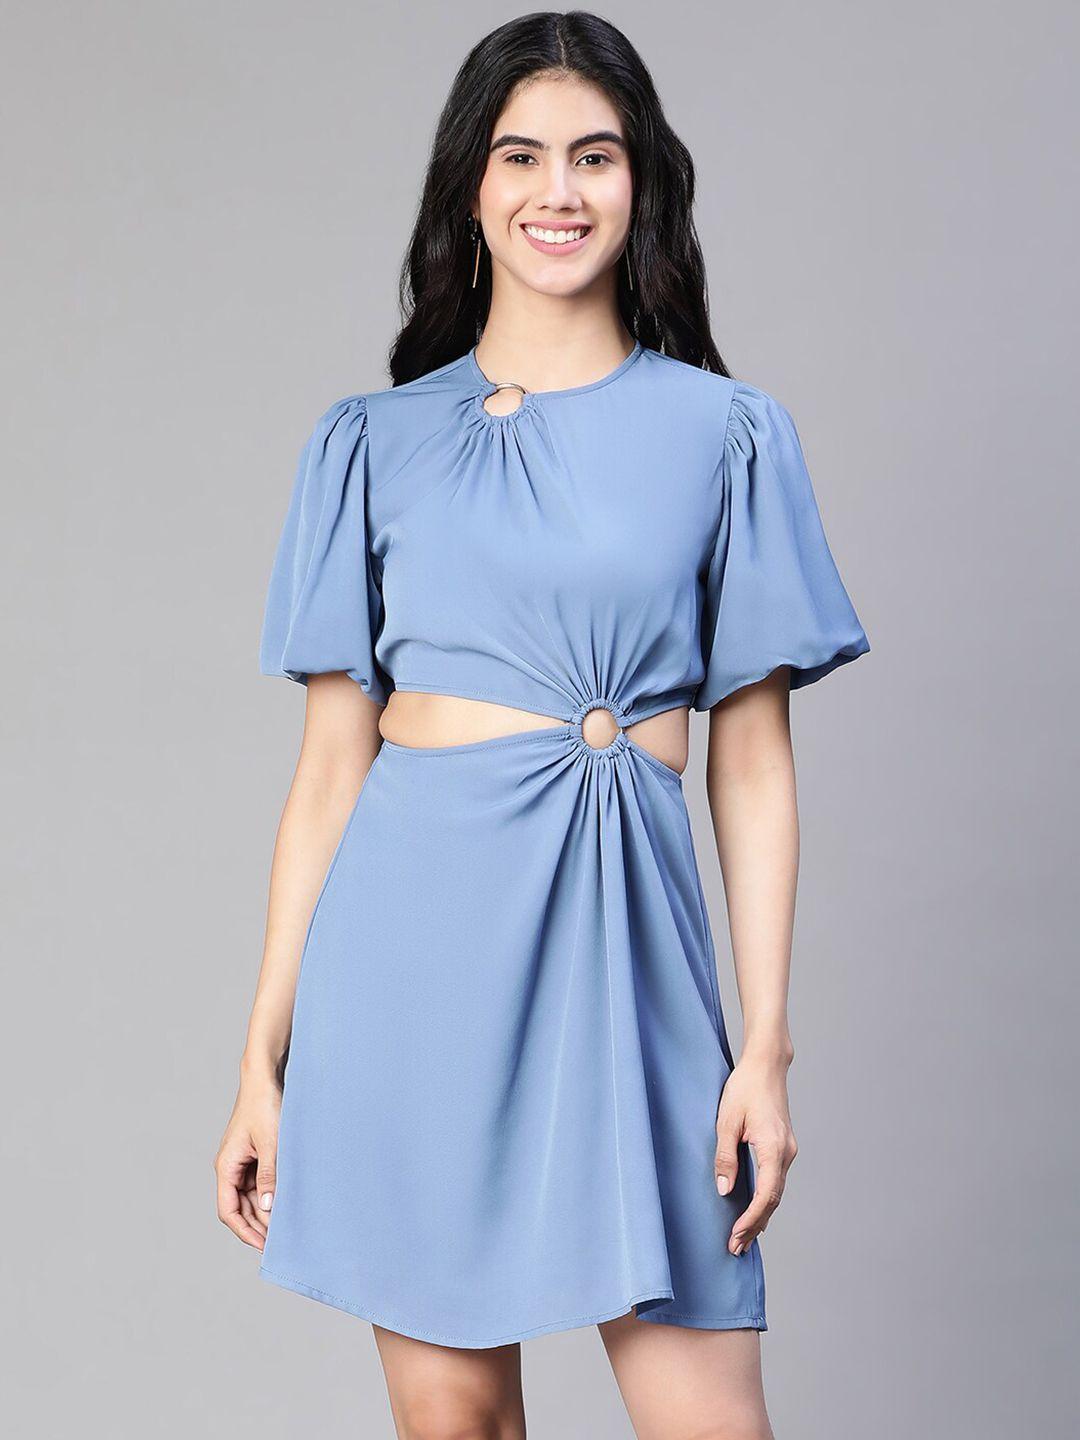 oxolloxo cut outs detail flared sleeves crepe a-line dress